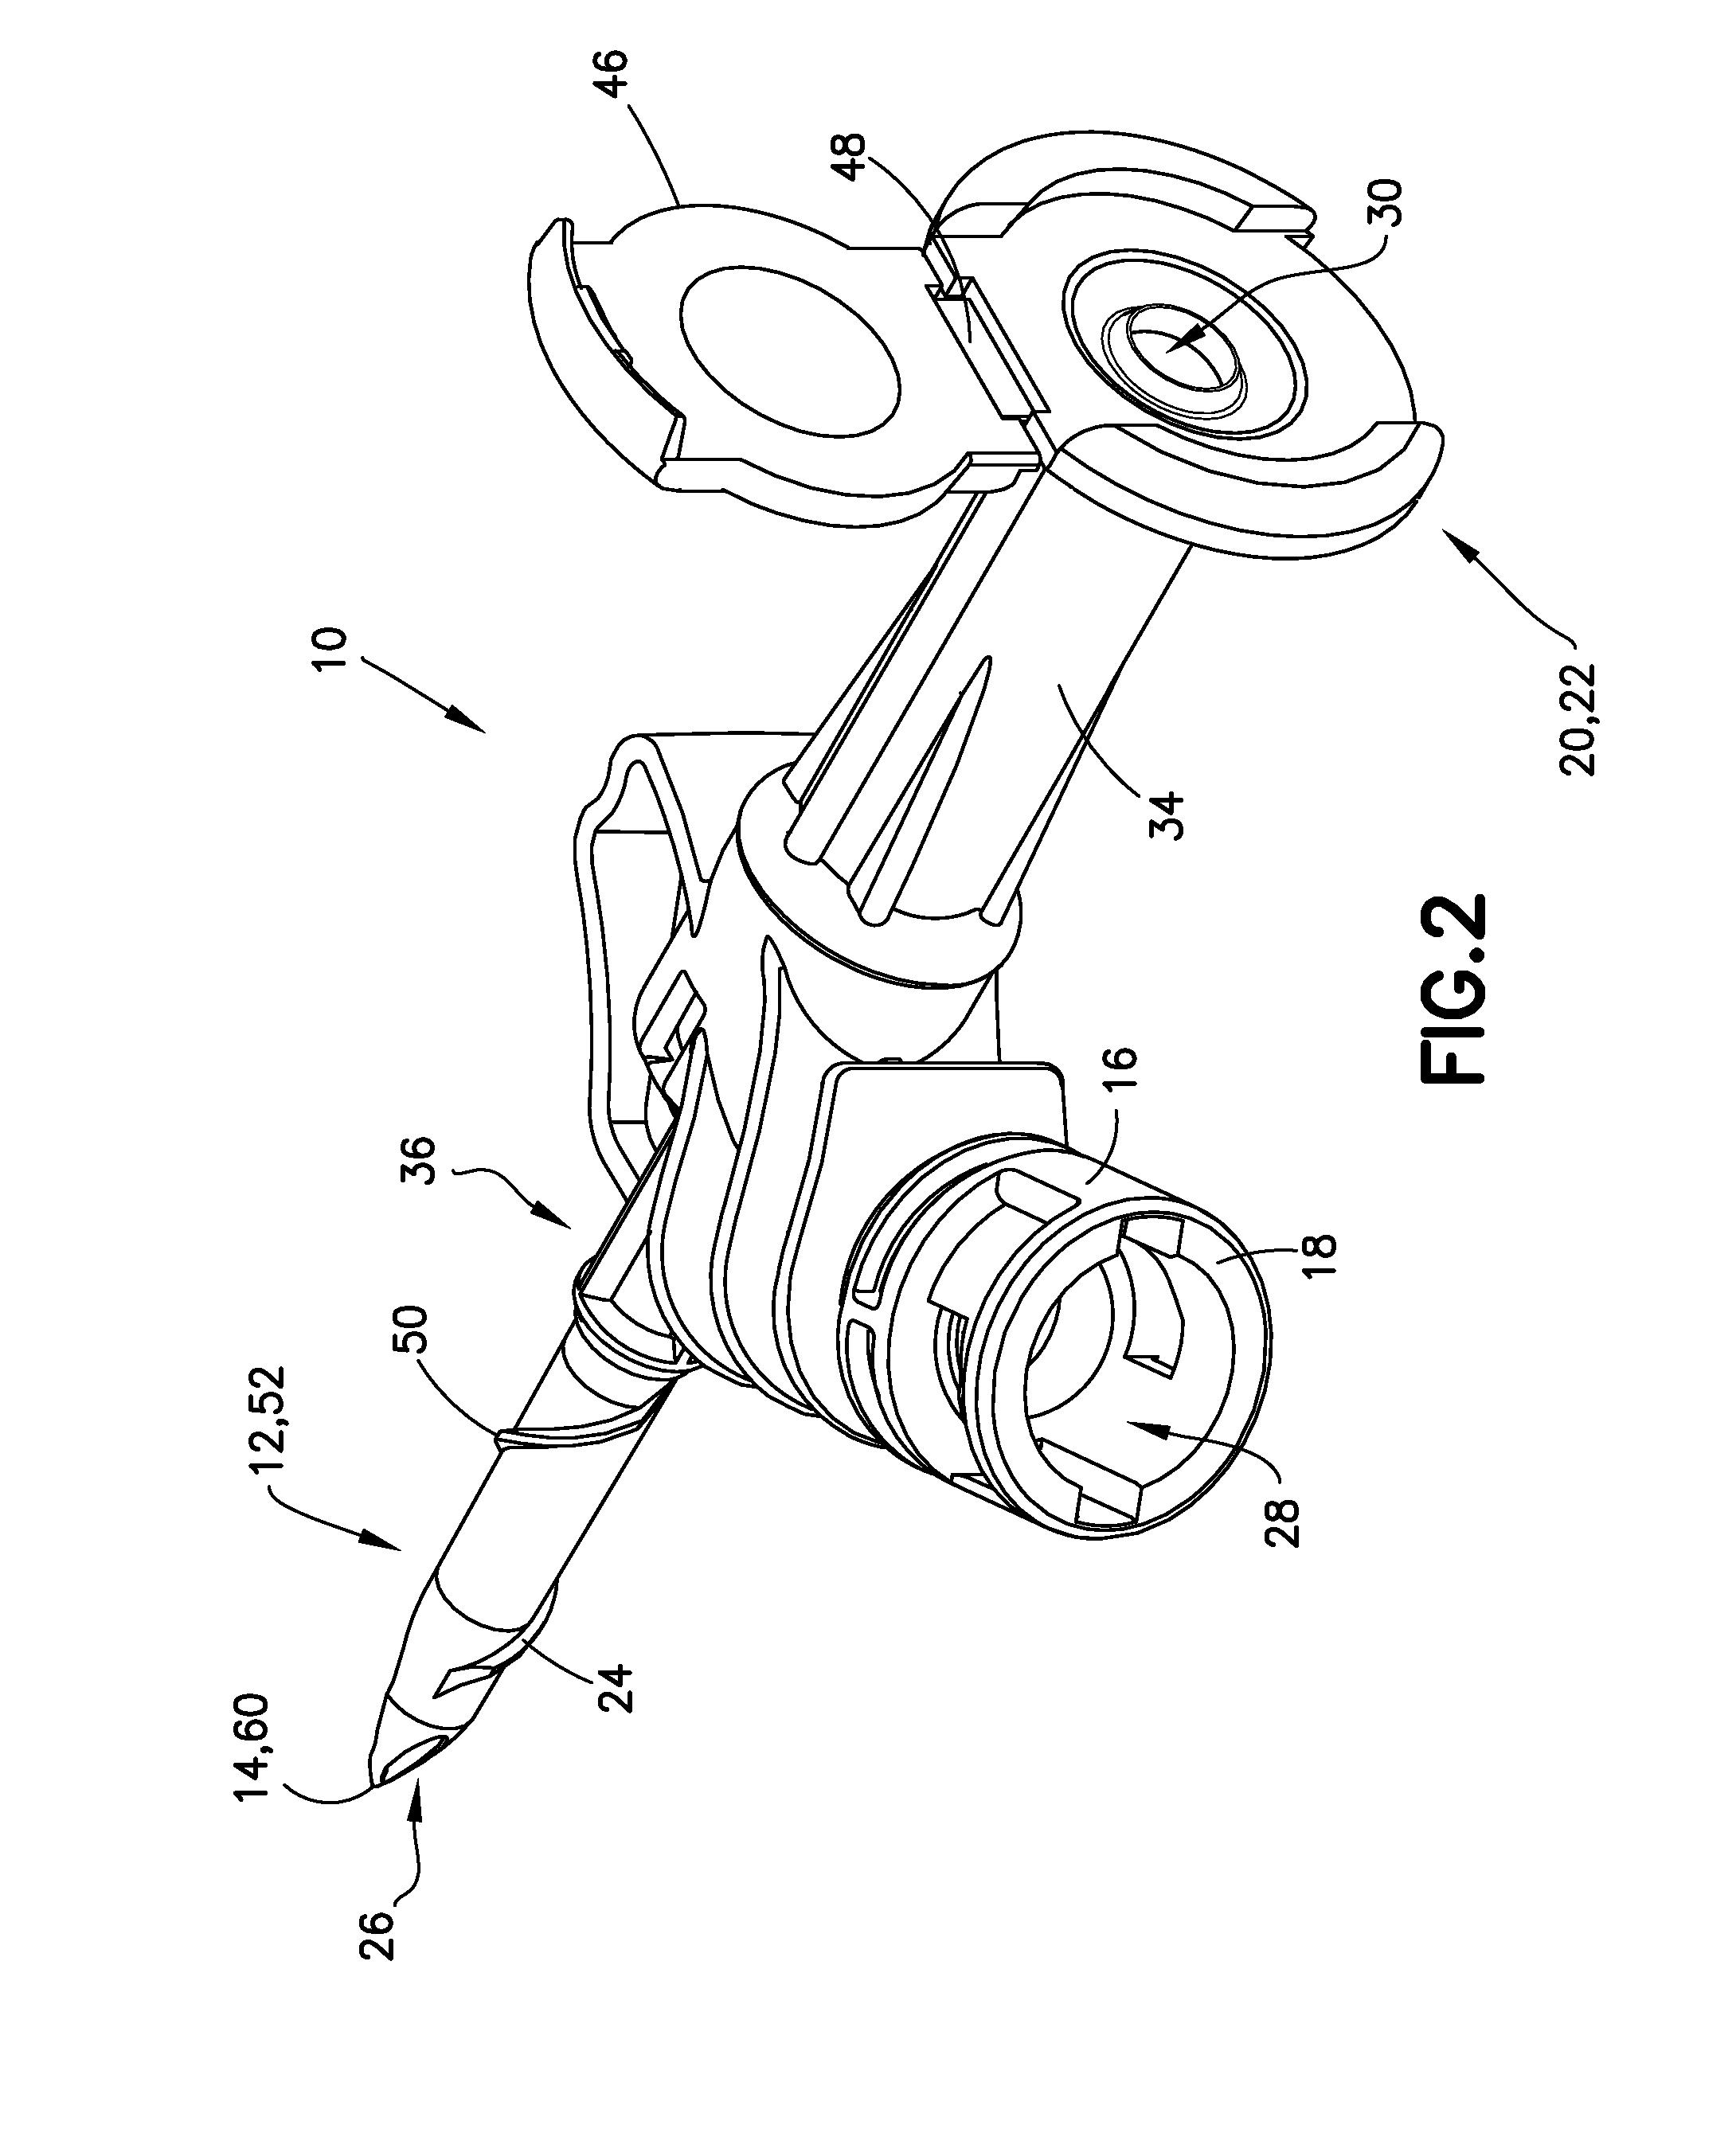 Infusion Adapter for Drug Transfer Assembly